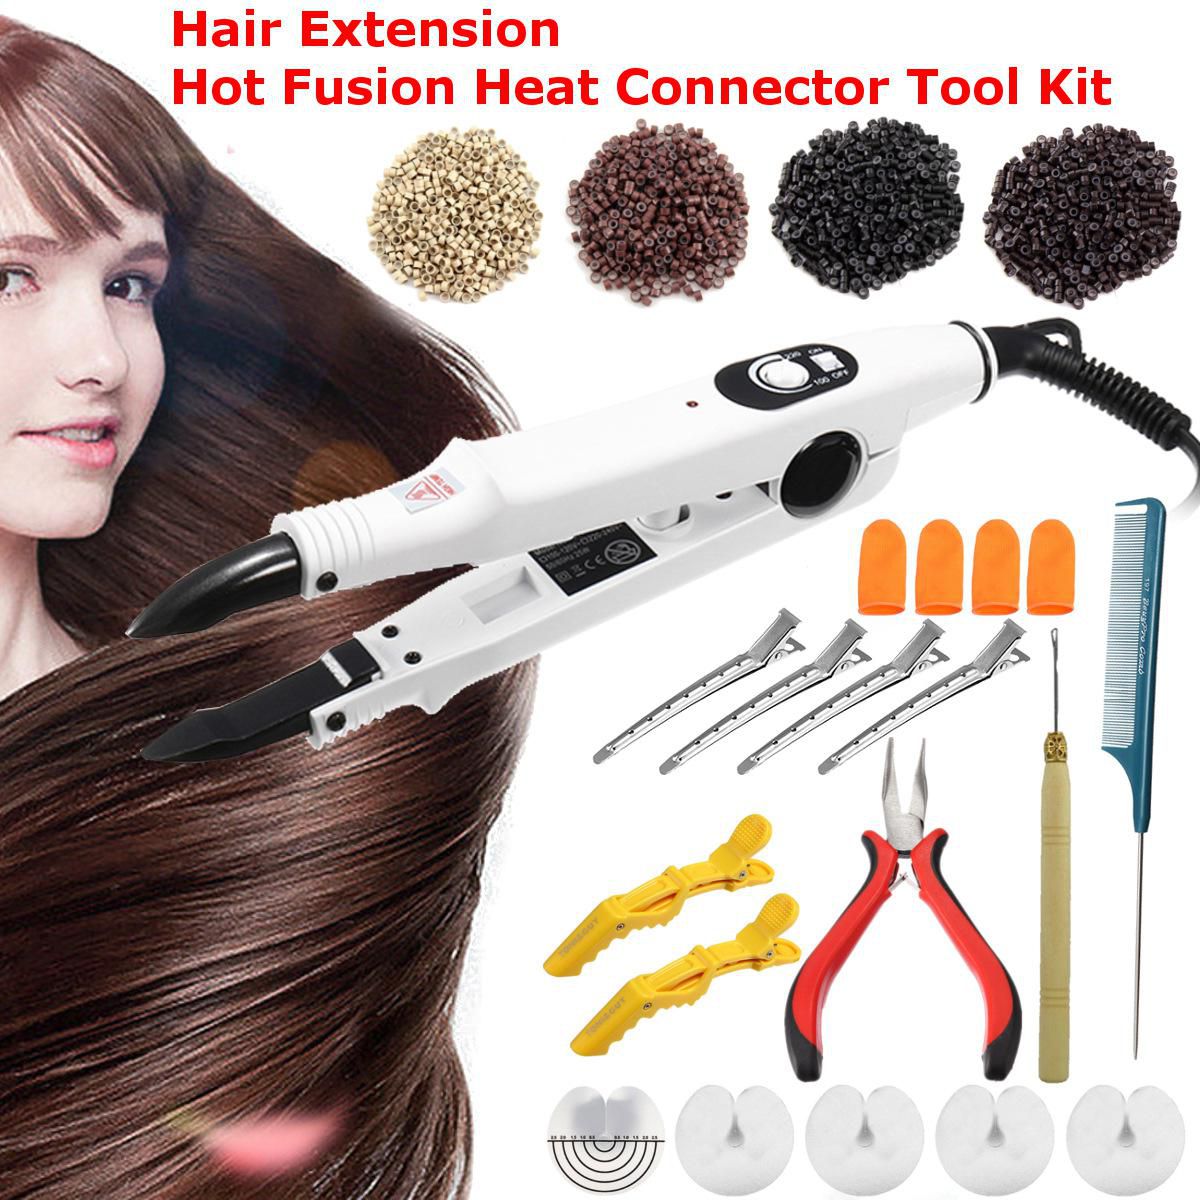 Pro Extension Hot Fusion Gun Heat Iron Wand Connector Human Hair Tool Kit  NEW: Buy Pro Extension Hot Fusion Gun Heat Iron Wand Connector Human Hair  Tool Kit NEW at Best Prices